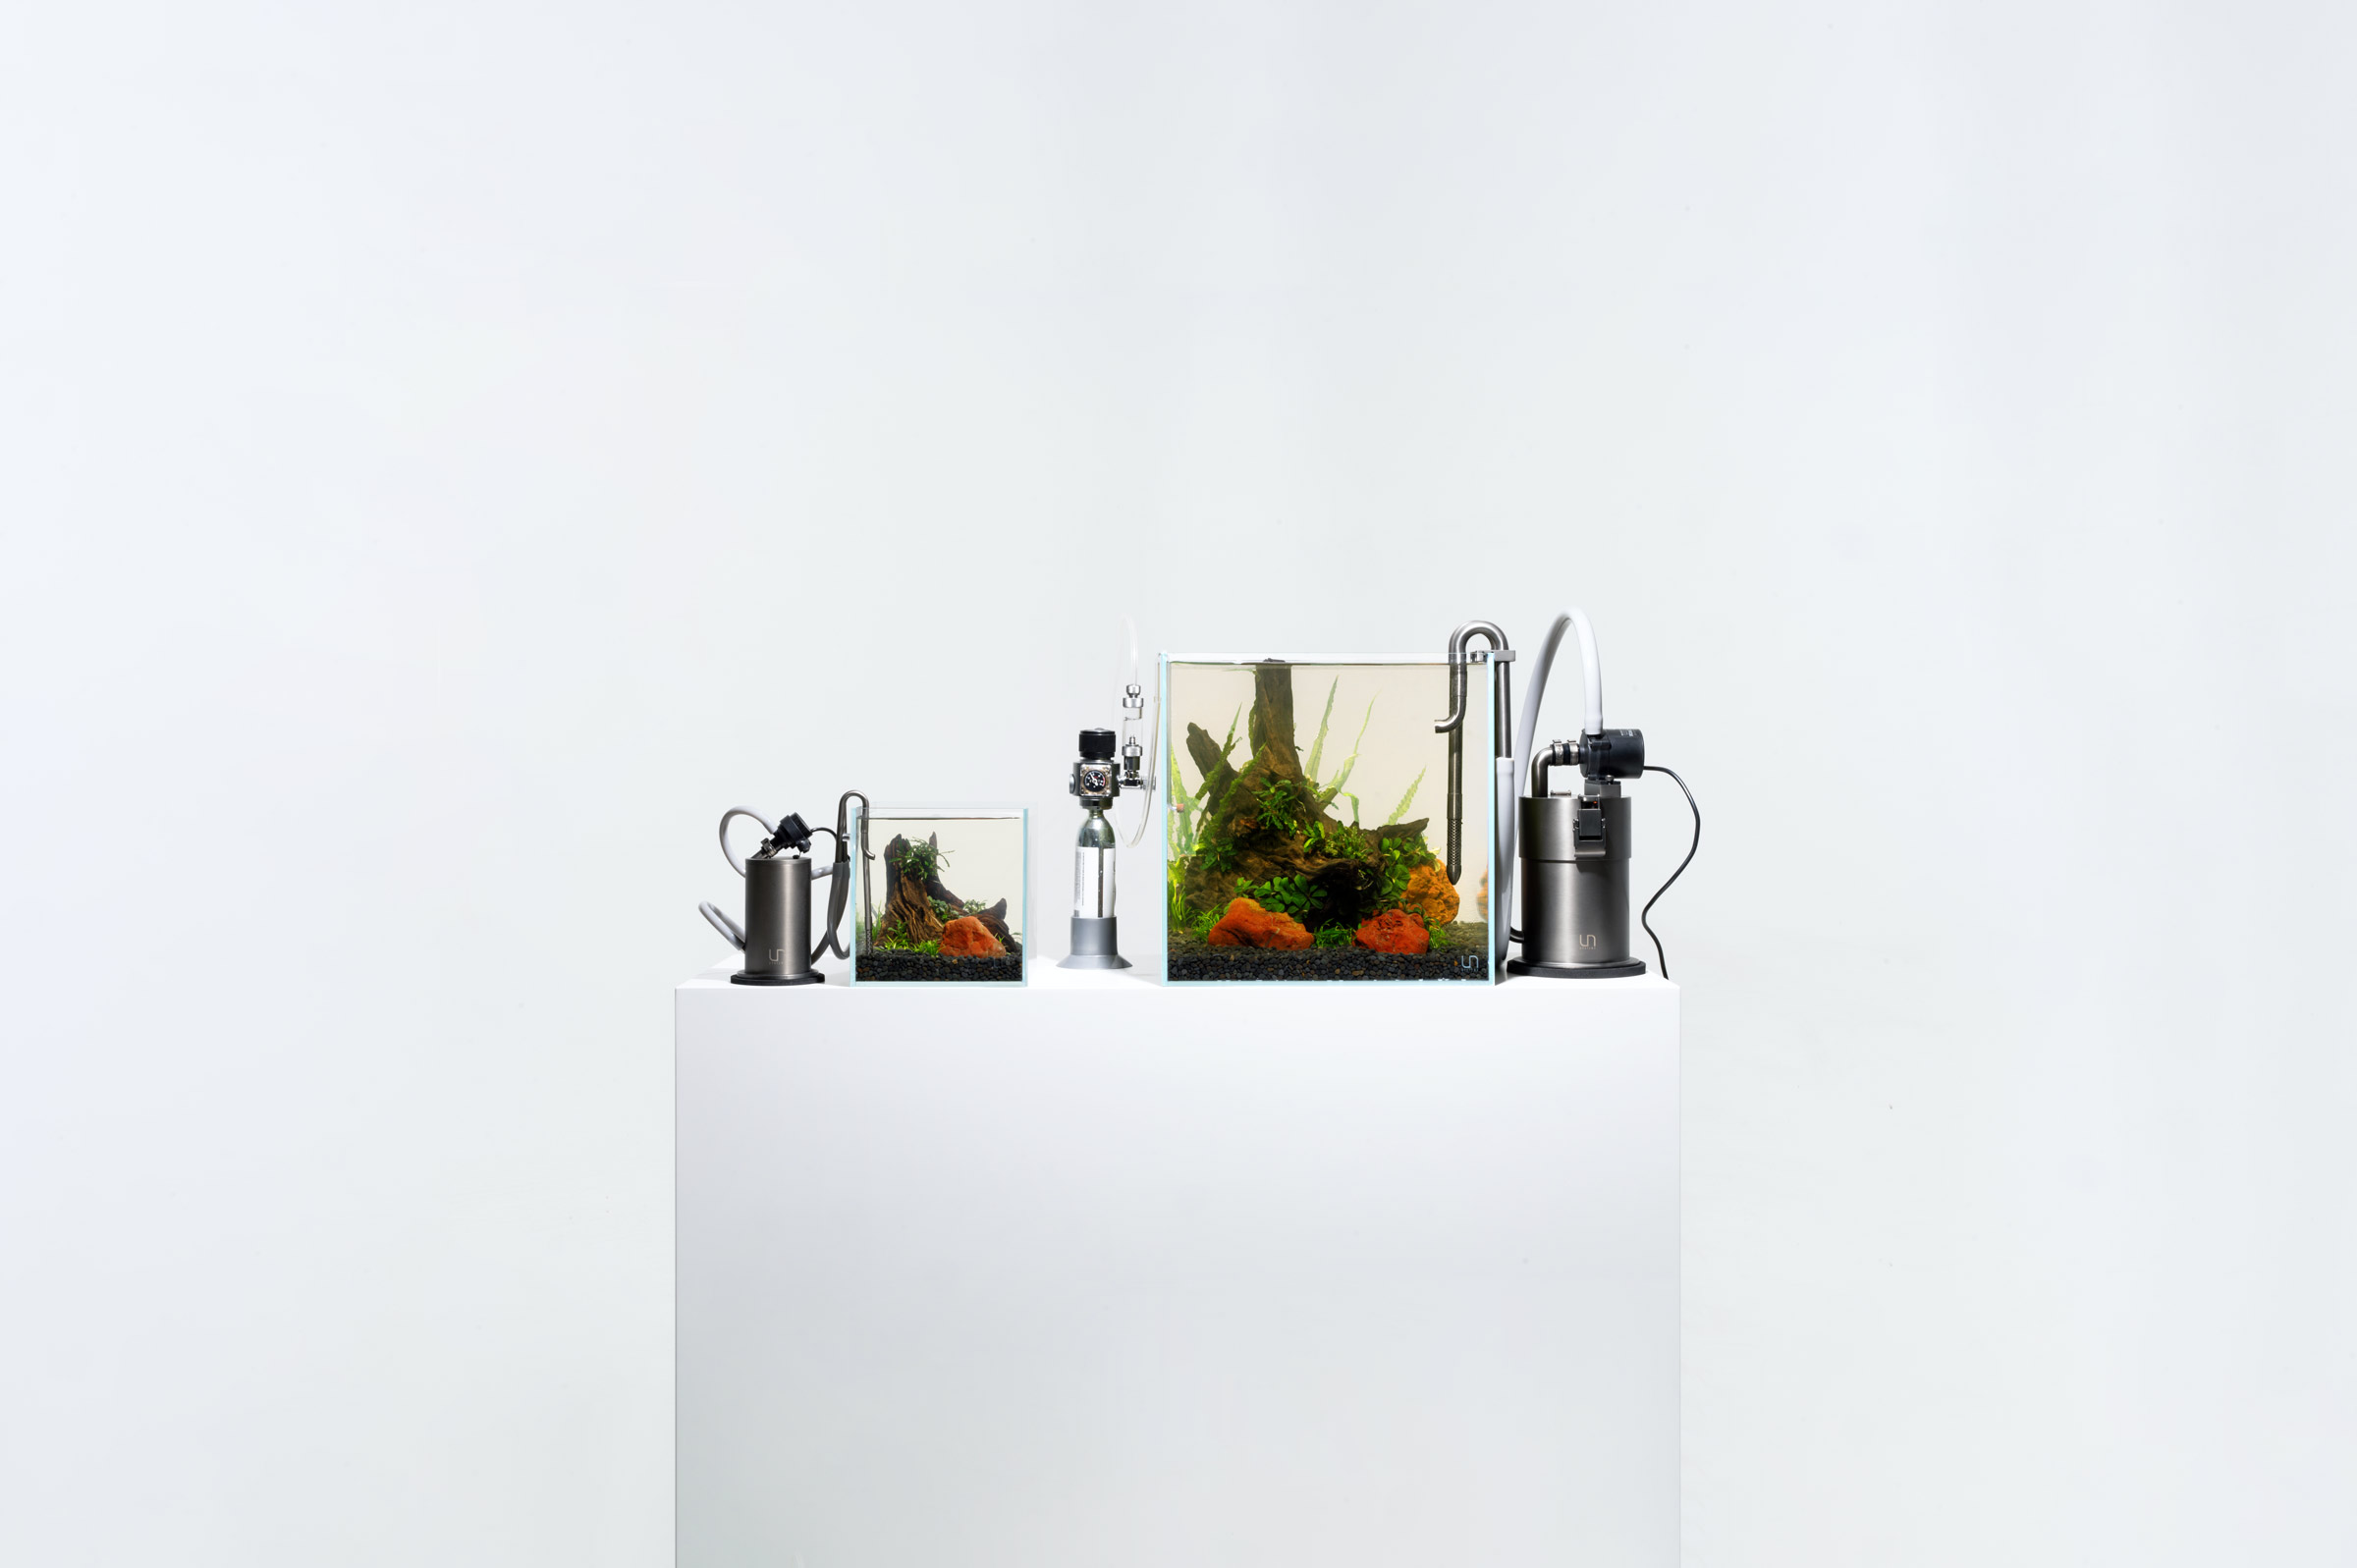 Ultum Nature Systems UNS stand with two rimless 16C and 30C tanks with 6 oz. and 32 oz. UNS Blitz stainless steel canister filters installed along with the mini CO2 system.